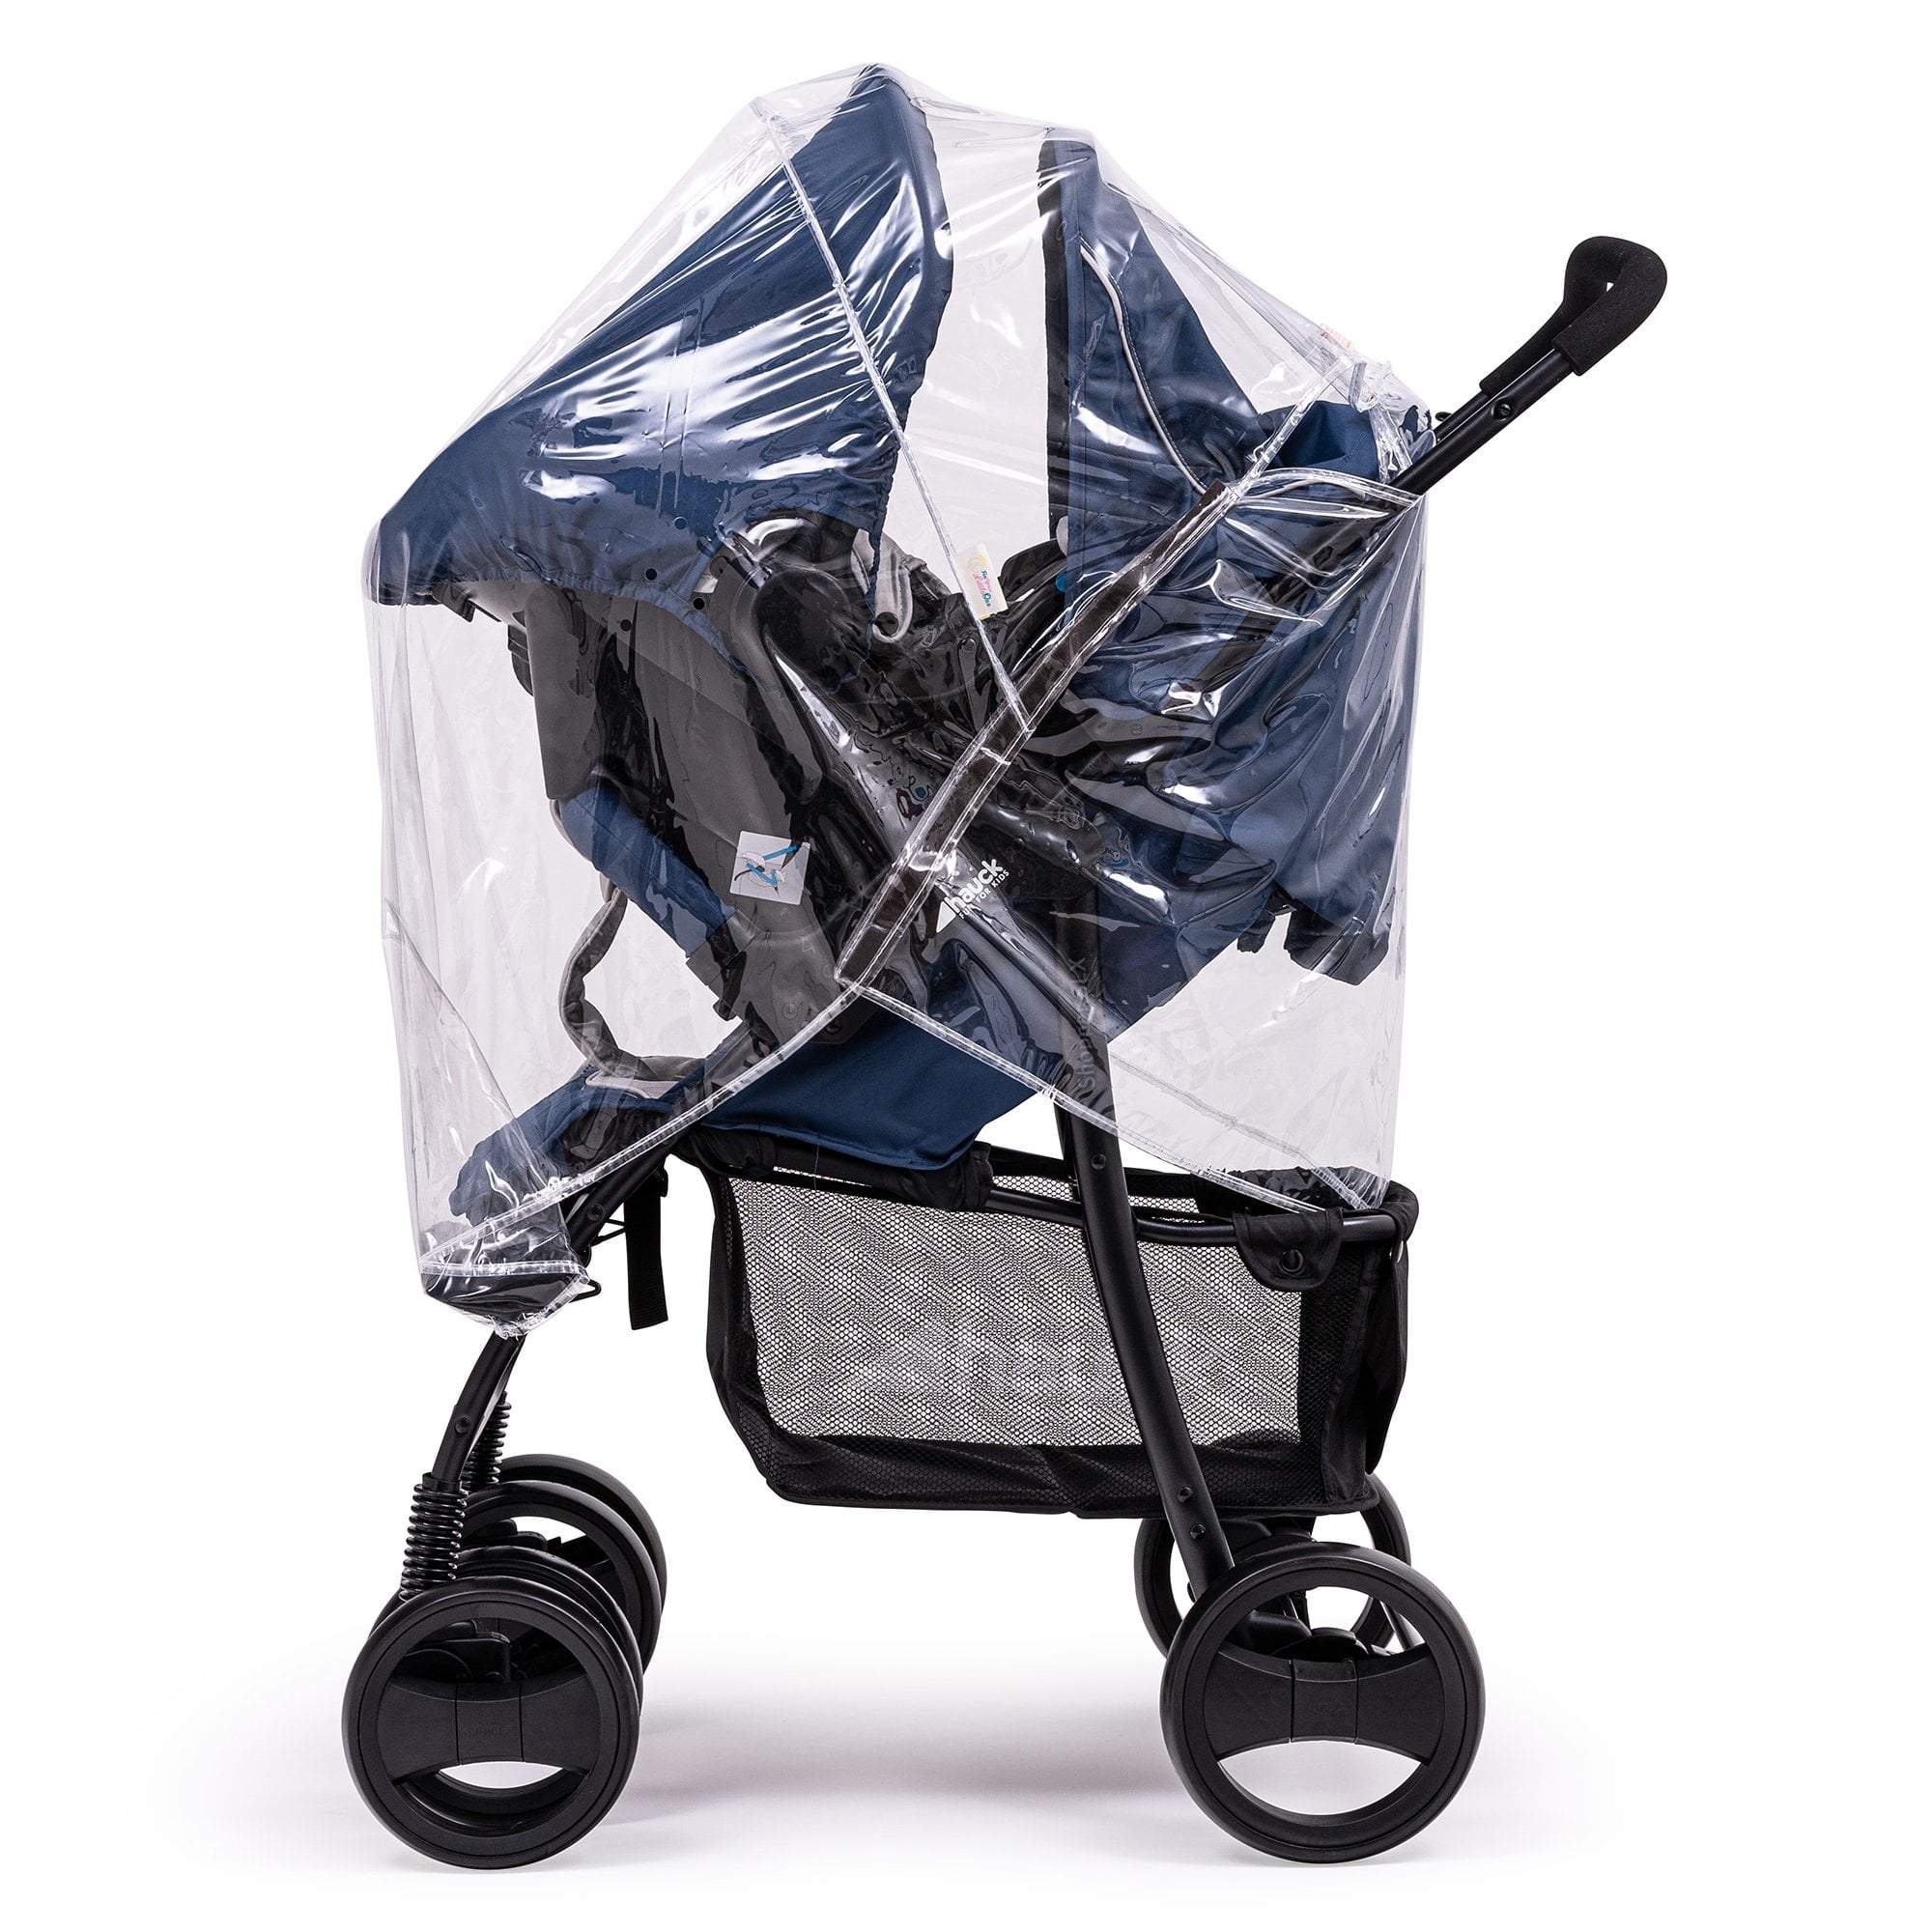 Travel System Raincover Compatible with Concord - Fits All Models - For Your Little One